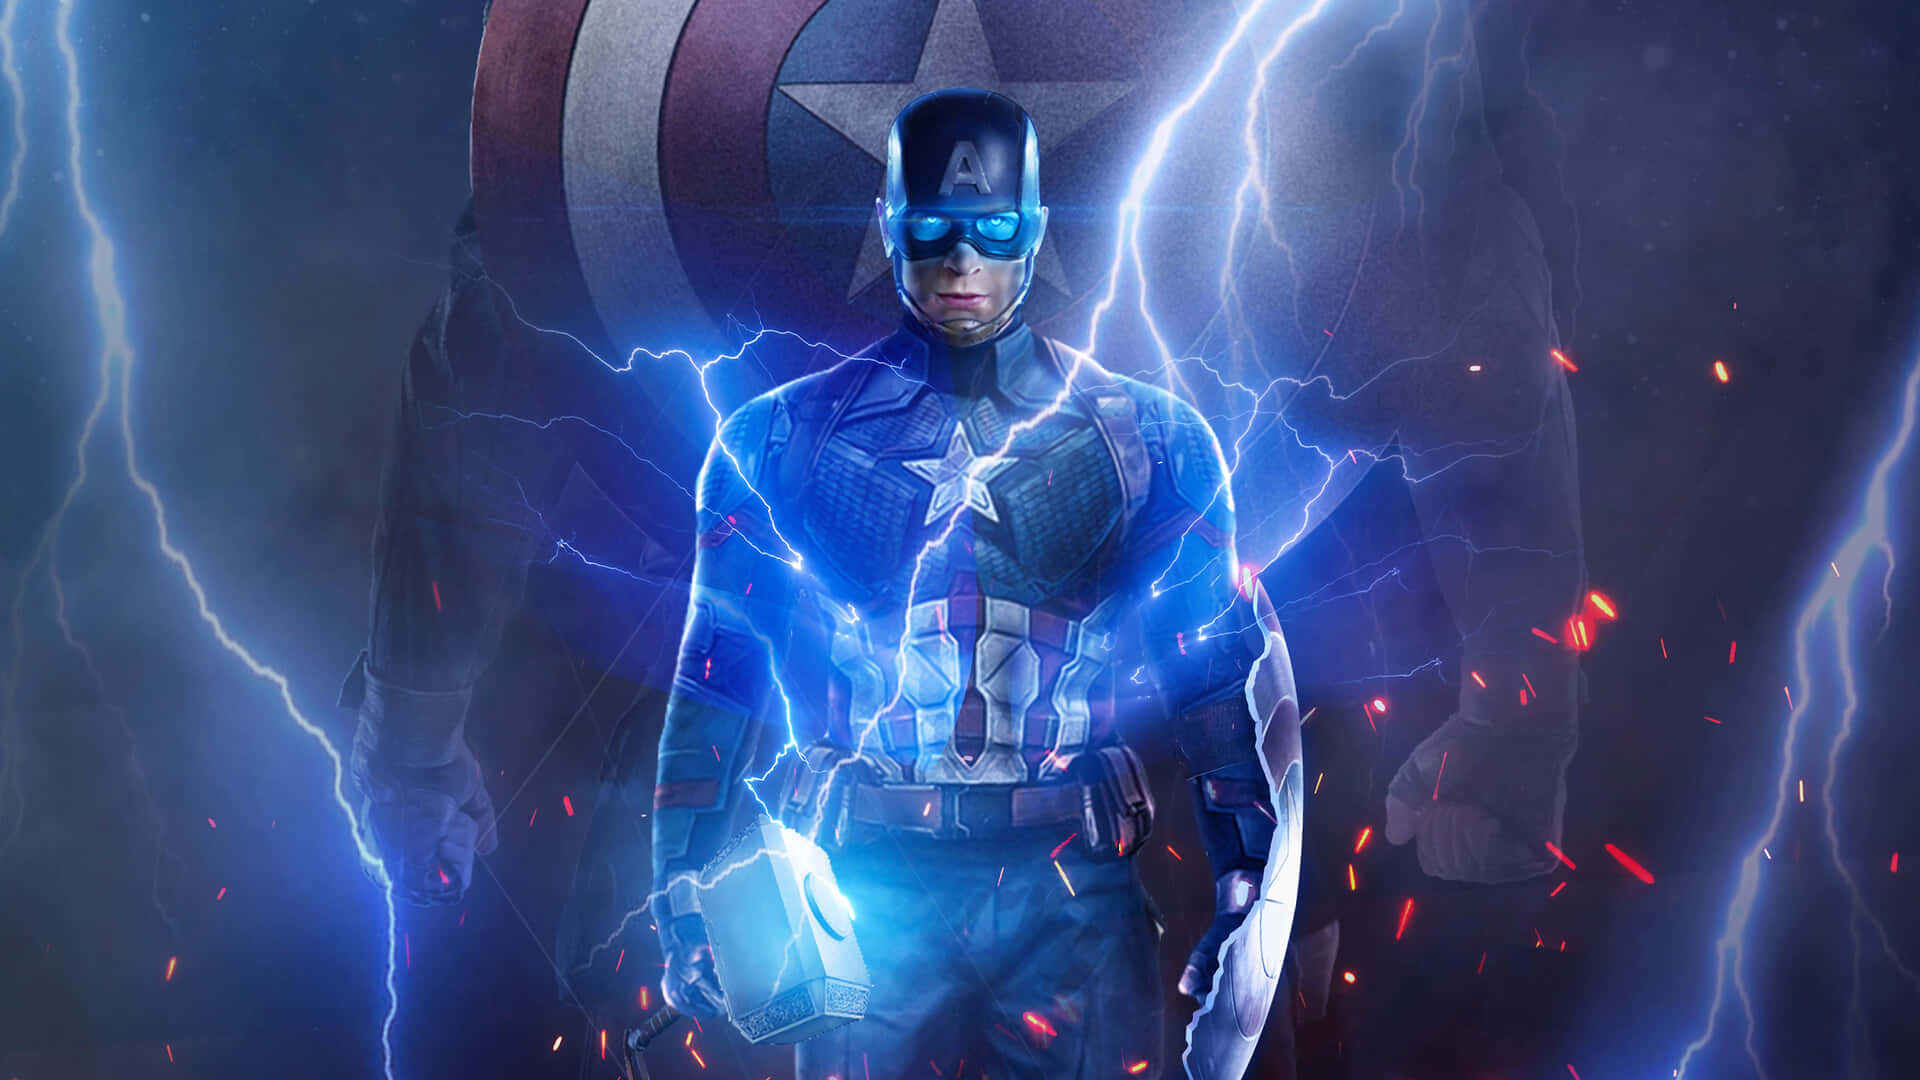 Embrace the Captain America shield of courage and justice. Wallpaper